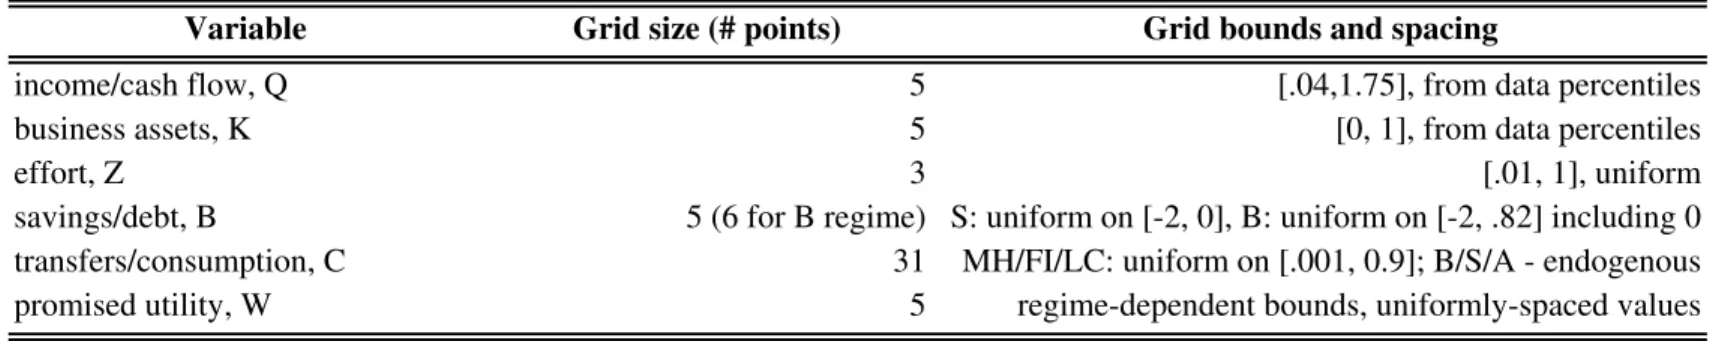 Table 2 - Baseline Variable Grids Used in the Estimation